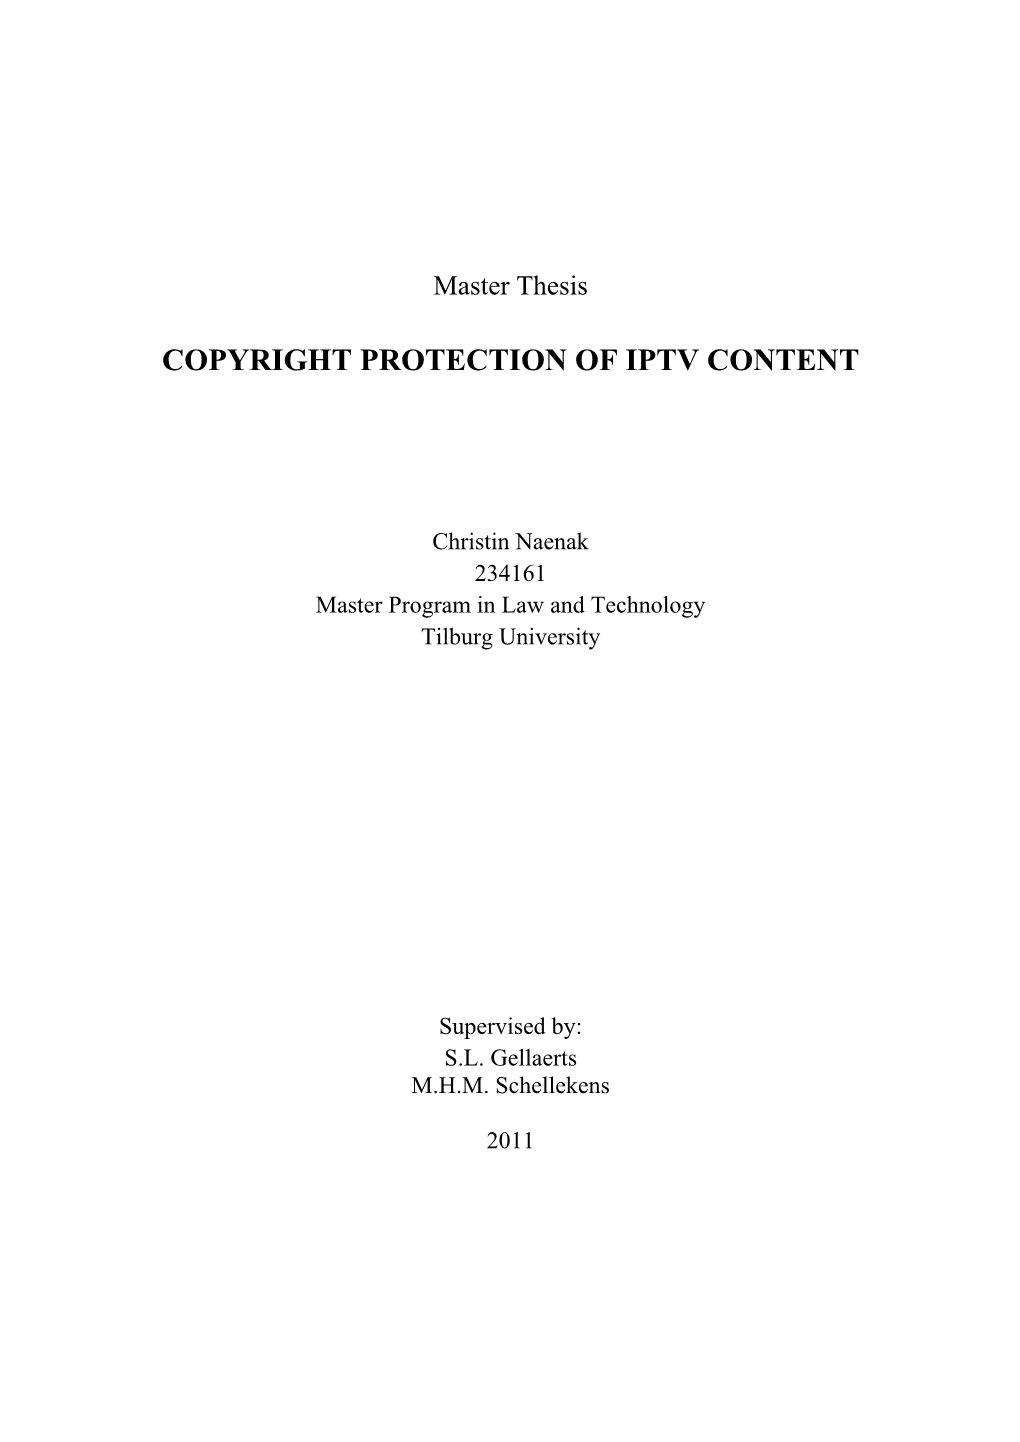 Copyright Protection of Iptv Content